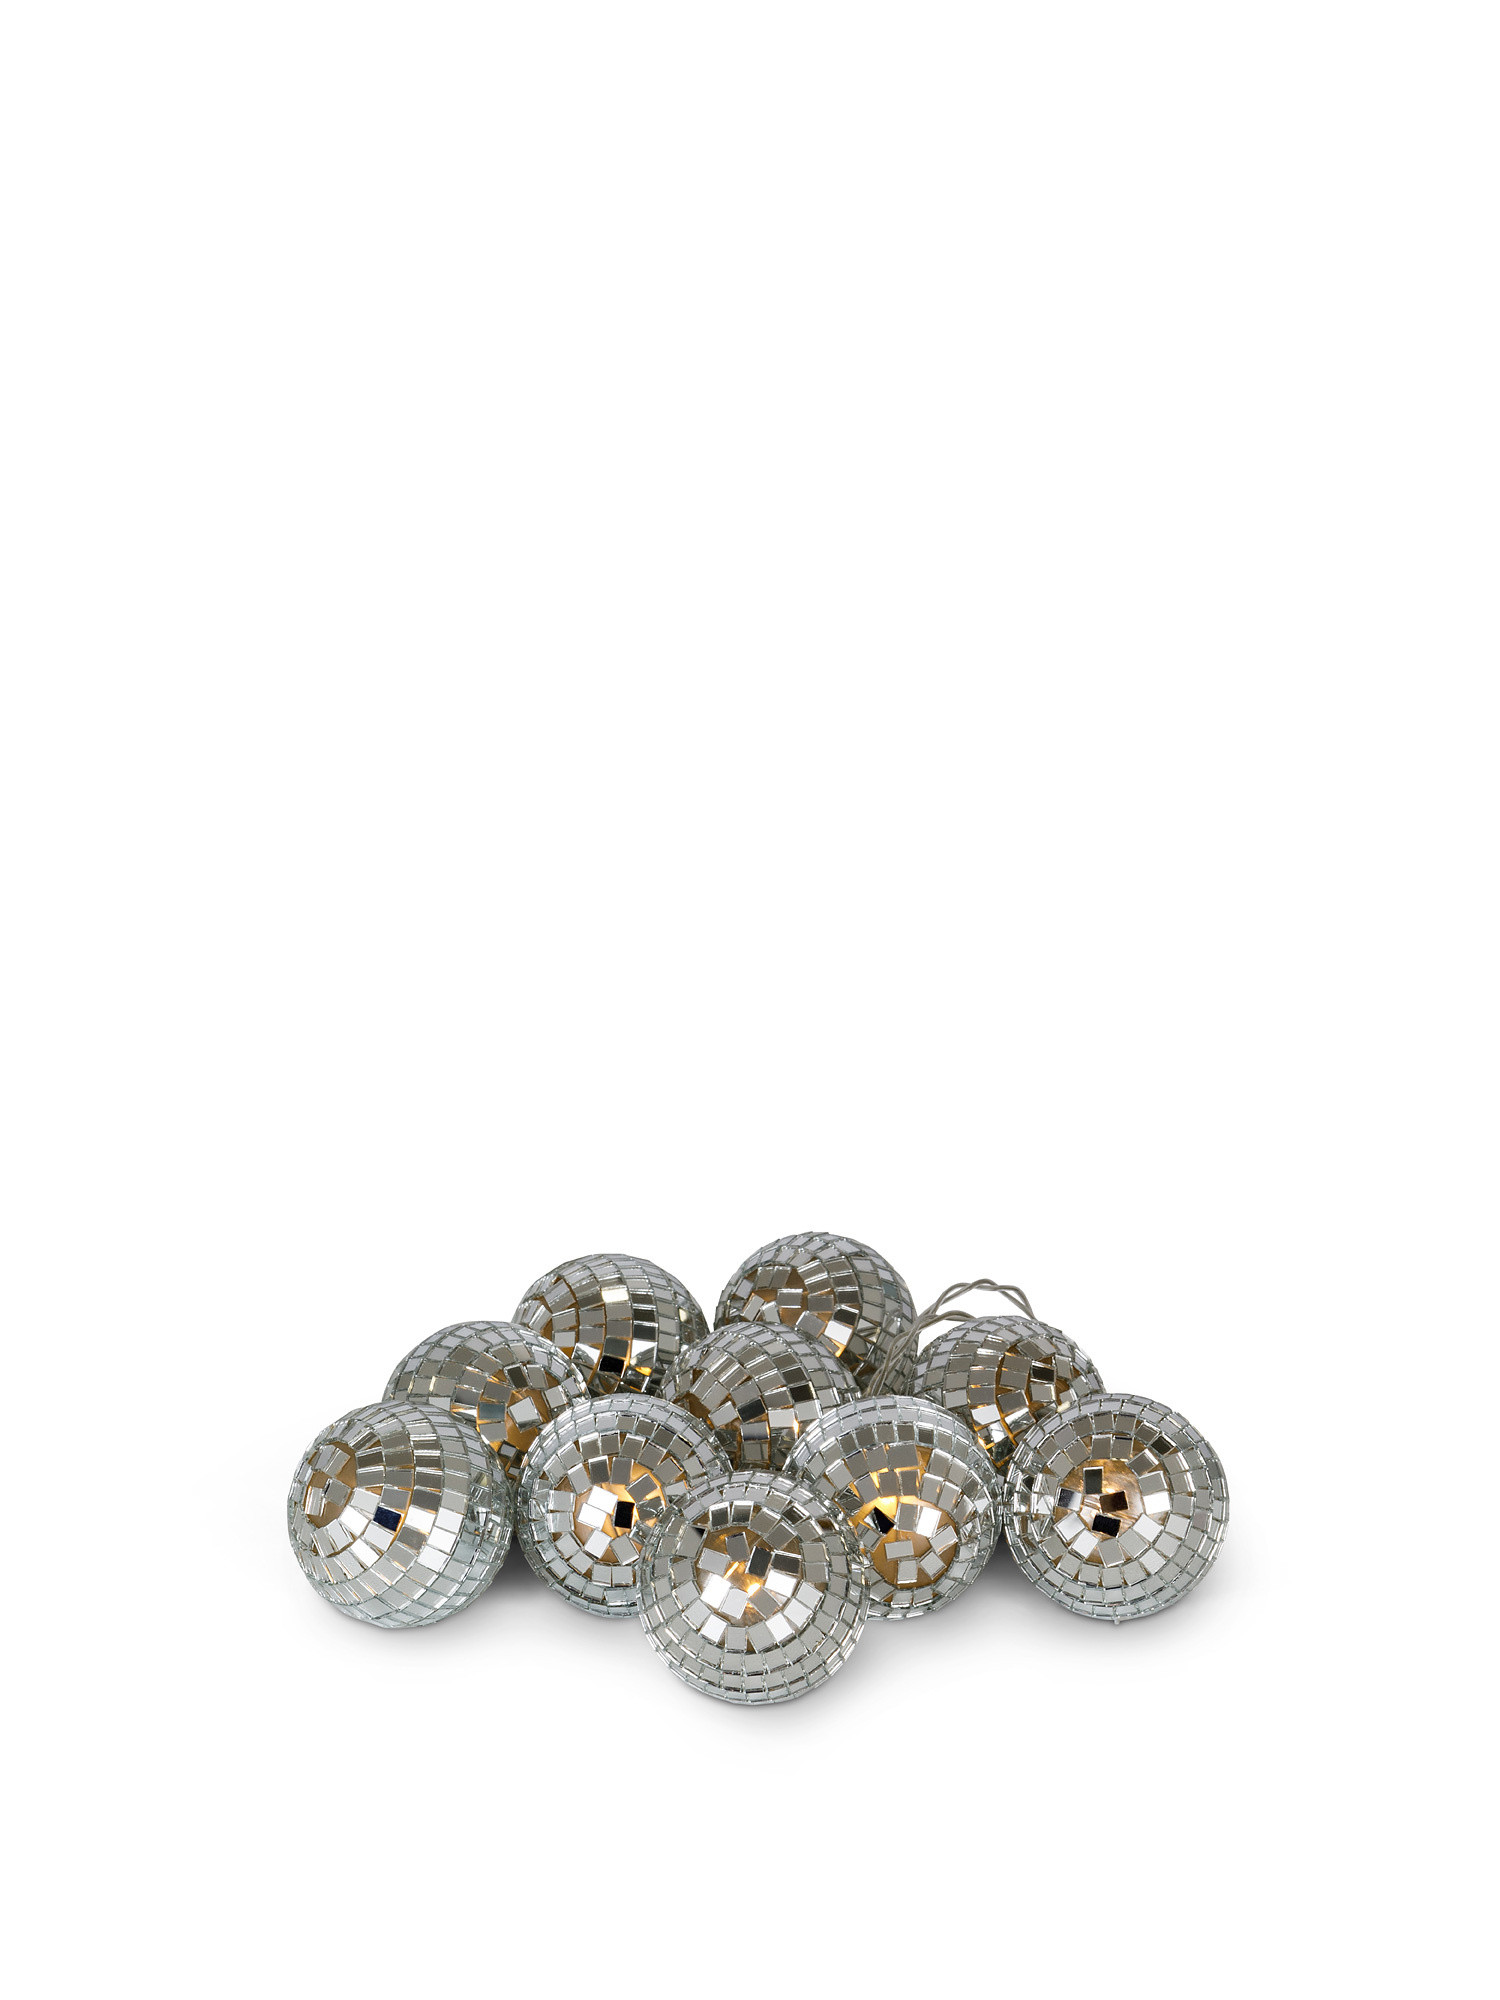 10 LED mirror ball chain, Silver Grey, large